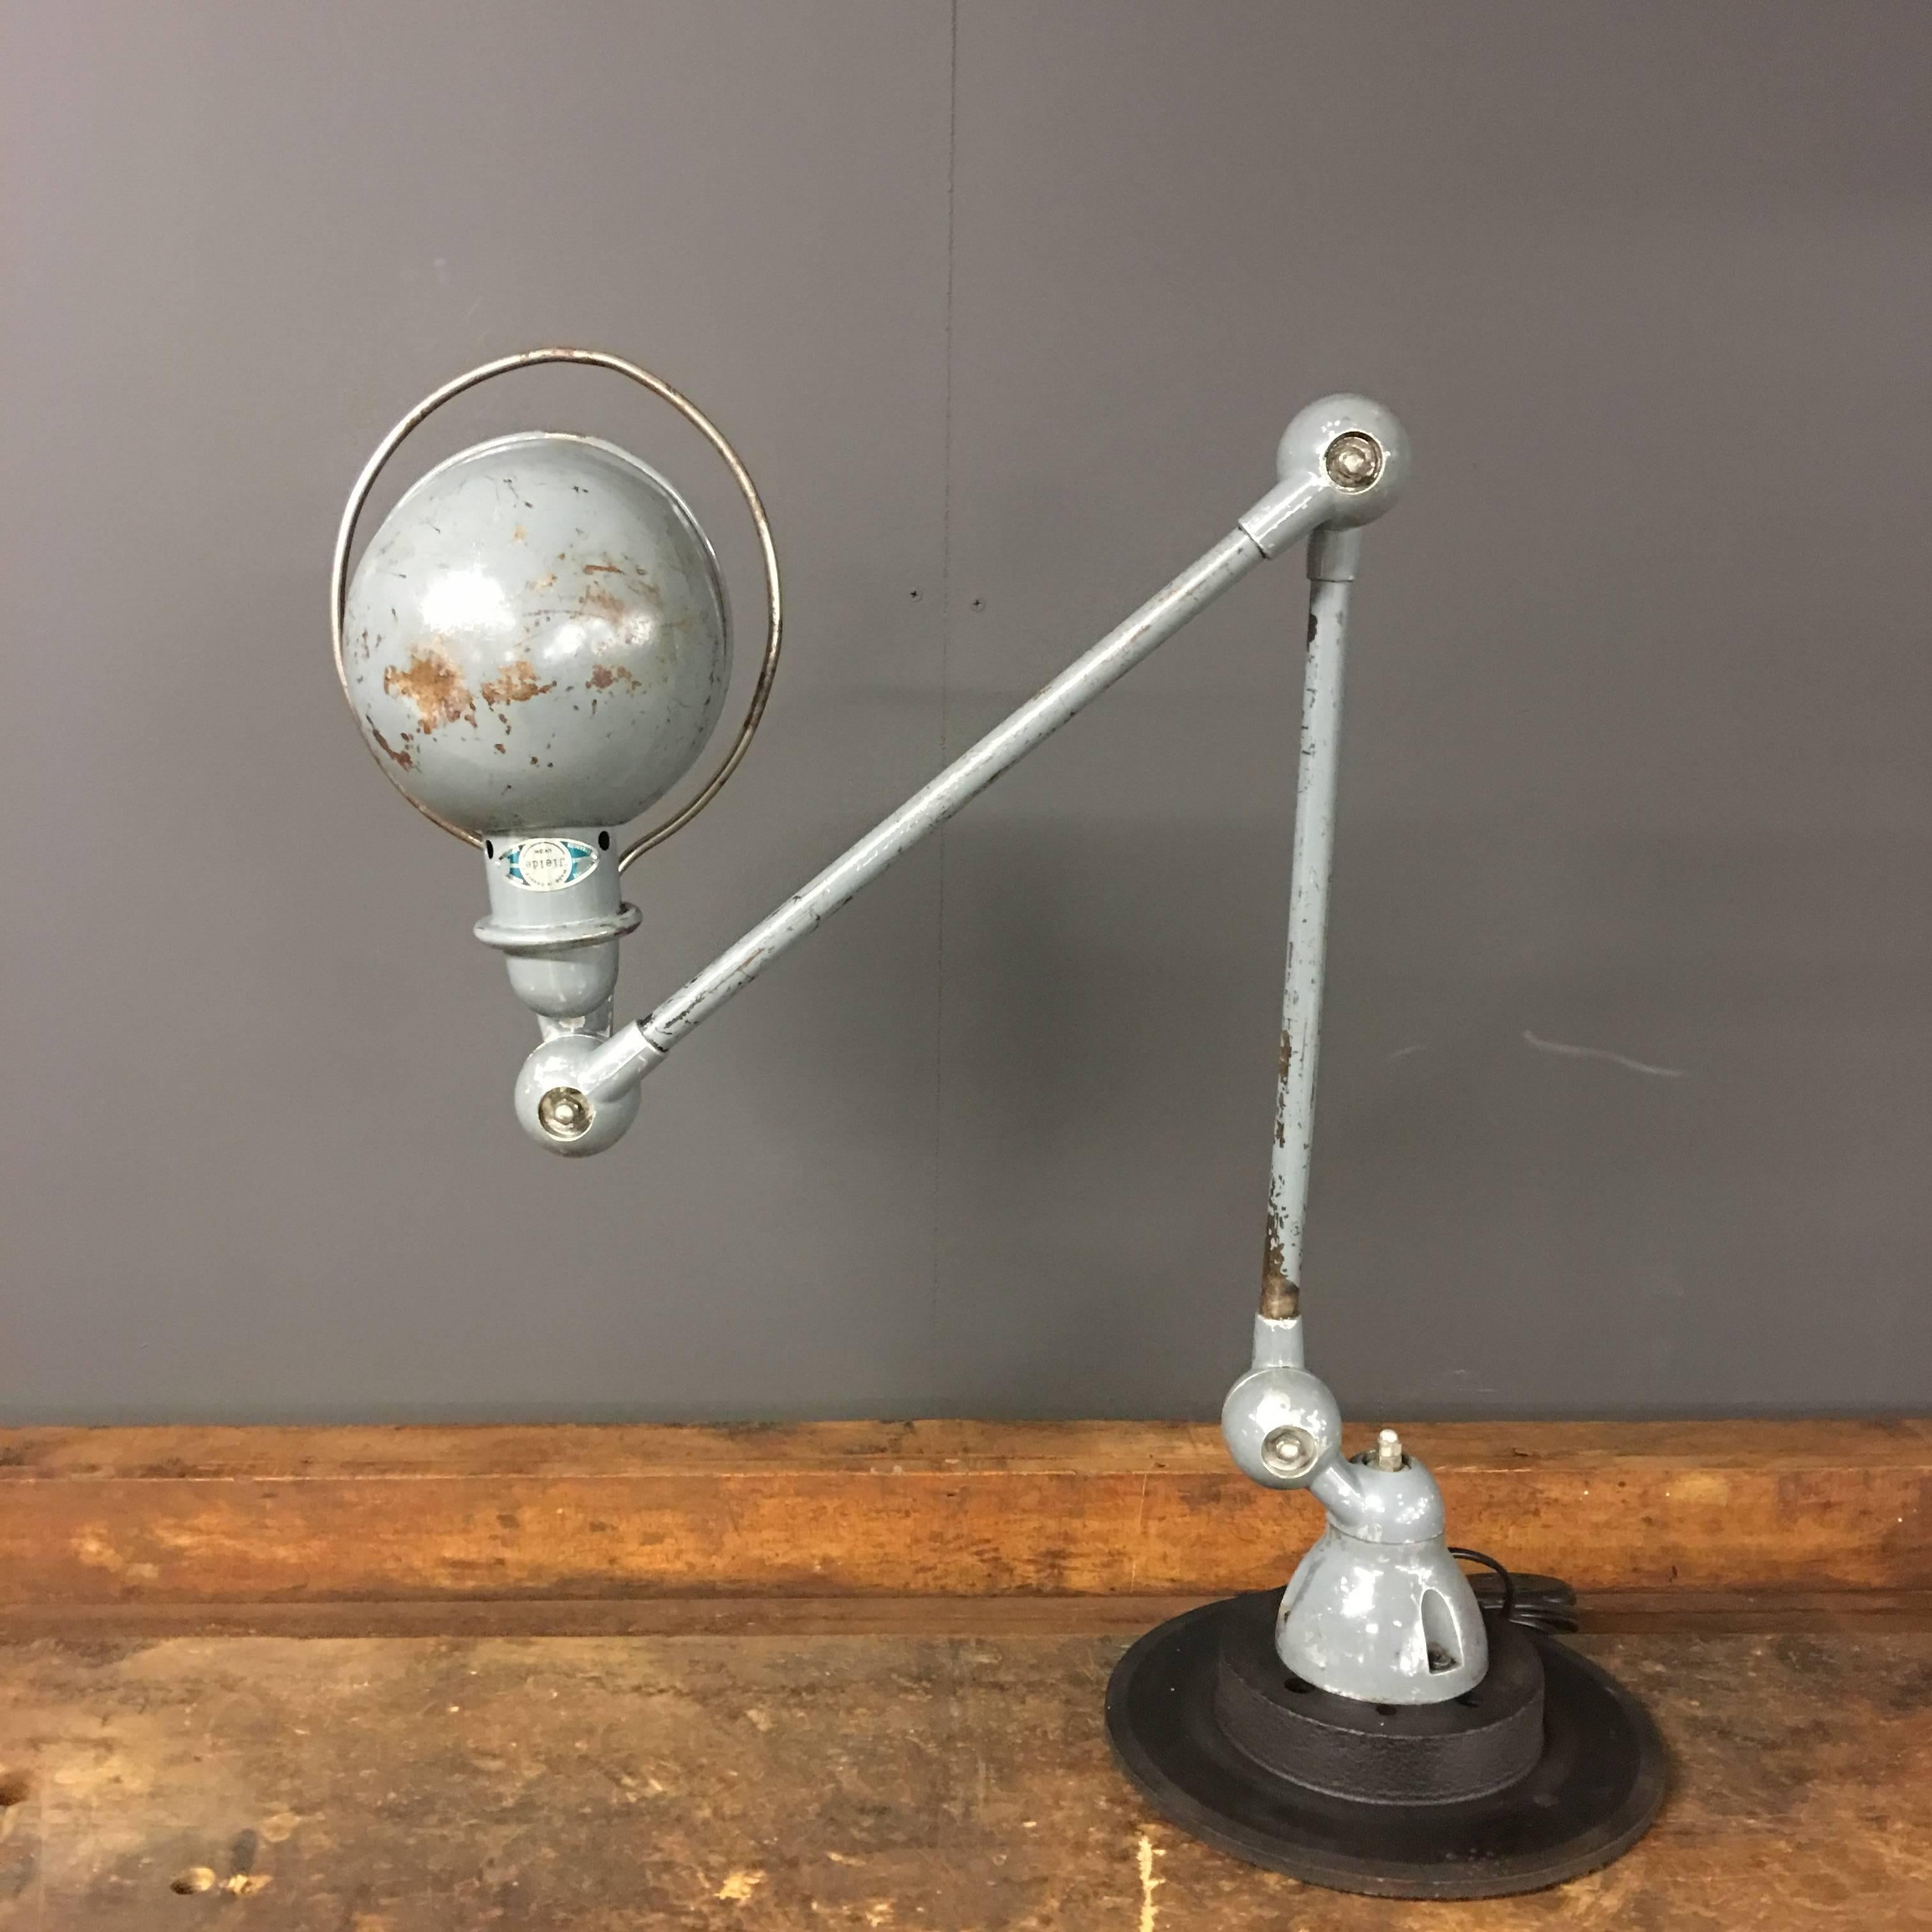 This French Industrial workbench light was designed by Jean-Louis Domecq and manufactured by Jieldé in Lyon, France, in the 1950s. It is mounted on a black painted brake disc.